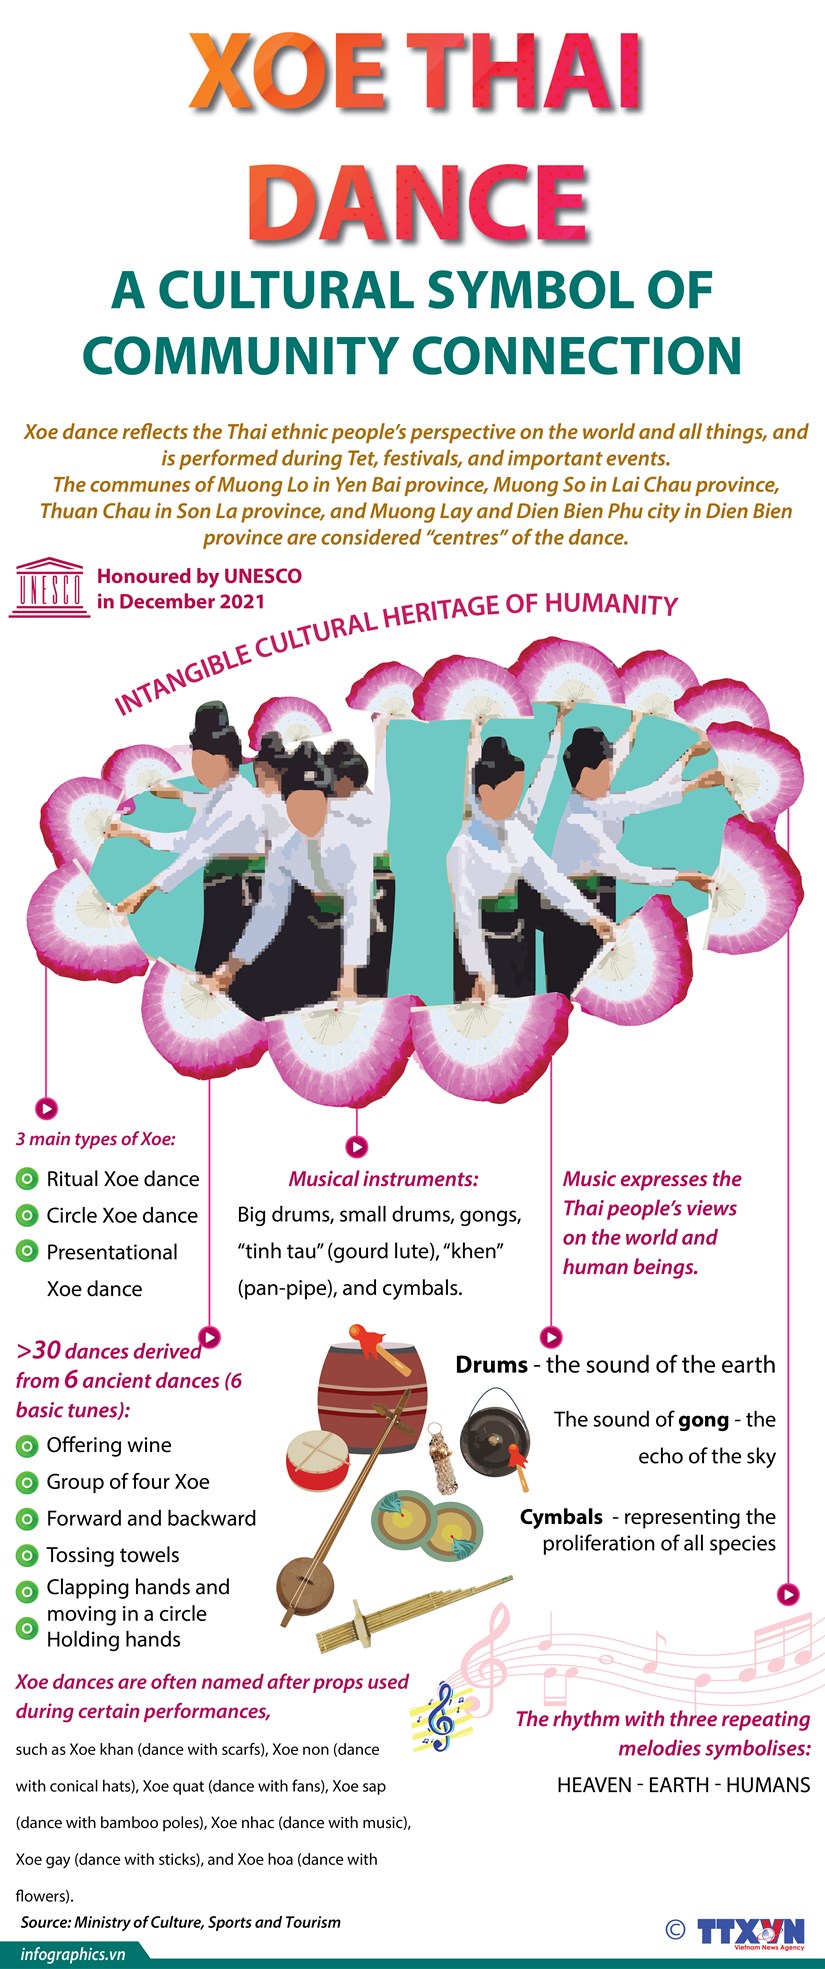 Xoe Thai Dance a cultural symbol of community connection hinh anh 1